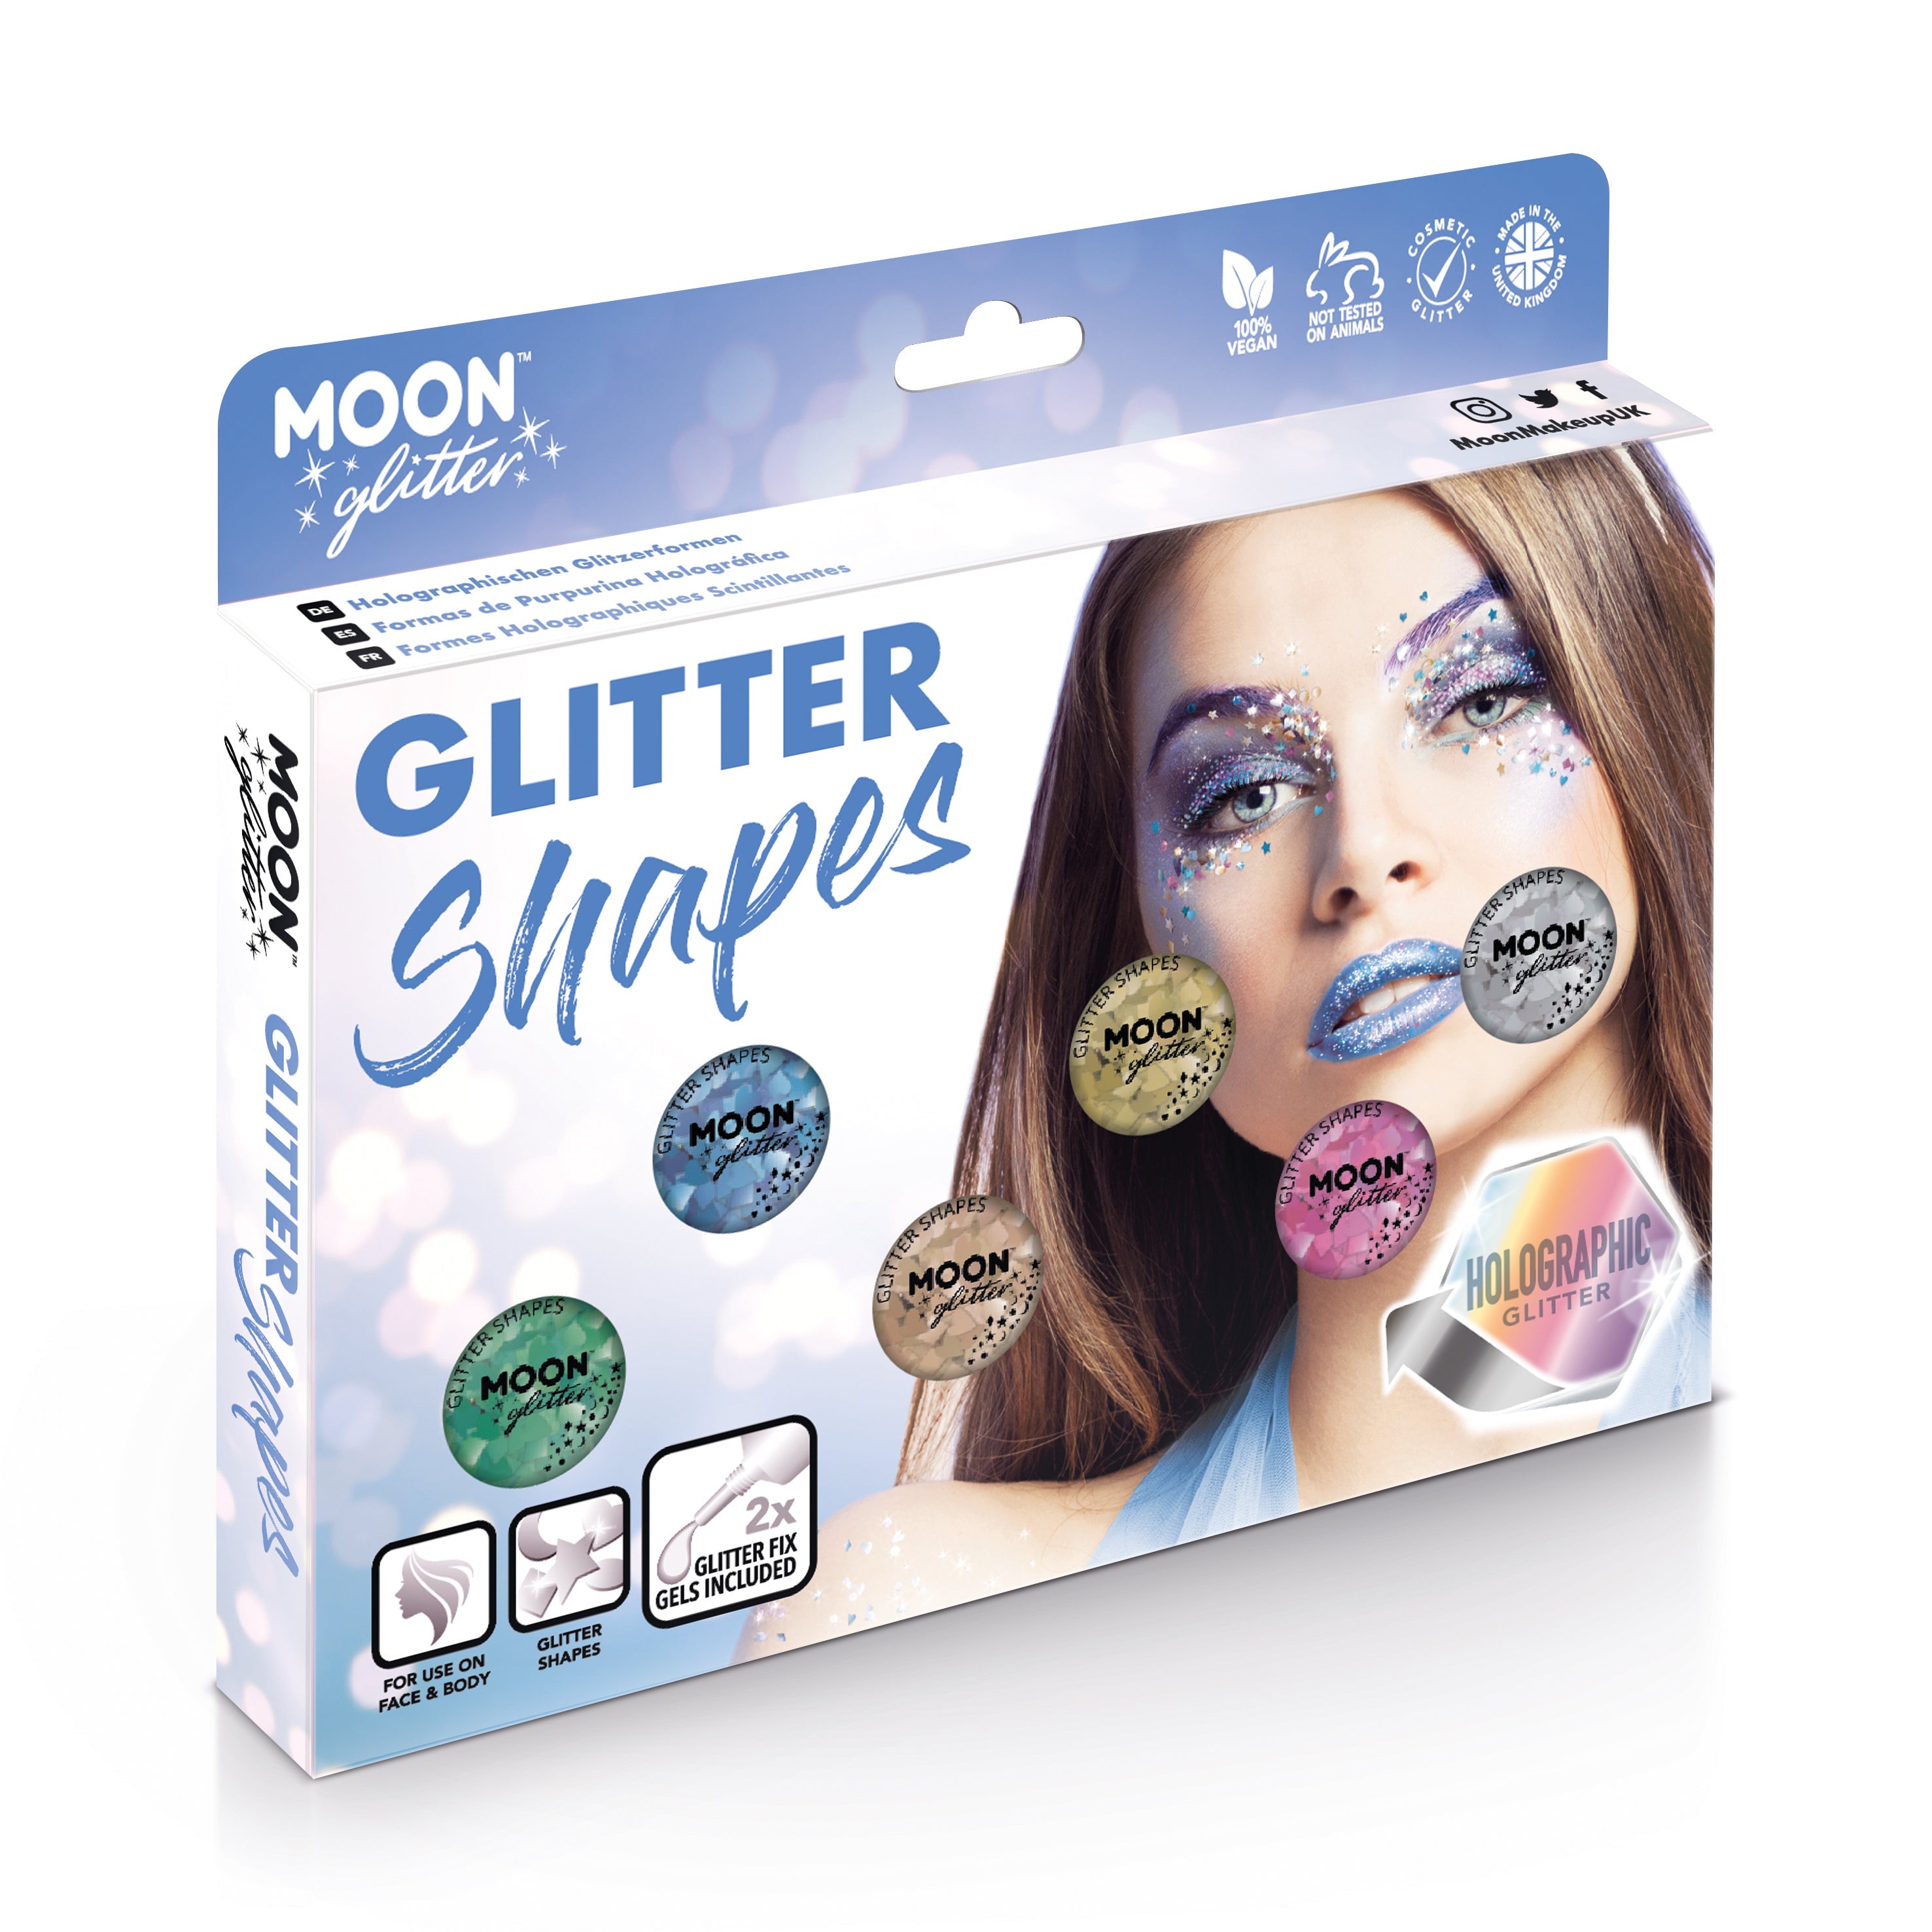 Holographic Face & Body Glitter Shapes Boxset - 6 pots, 2 fix gel, brush. Cosmetically certified, FDA & Health Canada compliant, cruelty free and vegan.